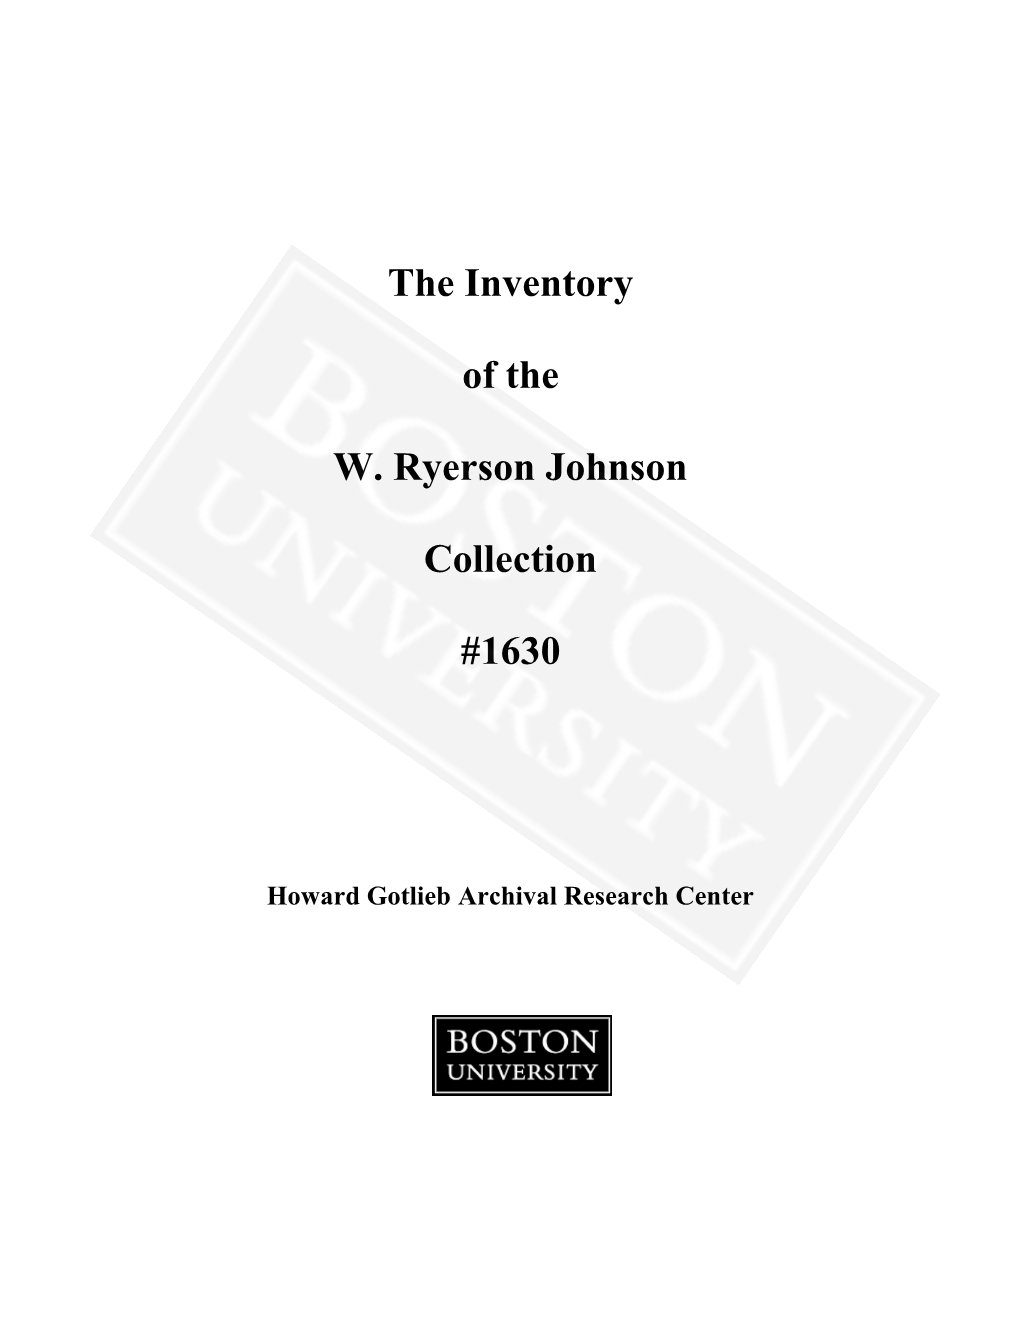 The Inventory of the W. Ryerson Johnson Collection #1630